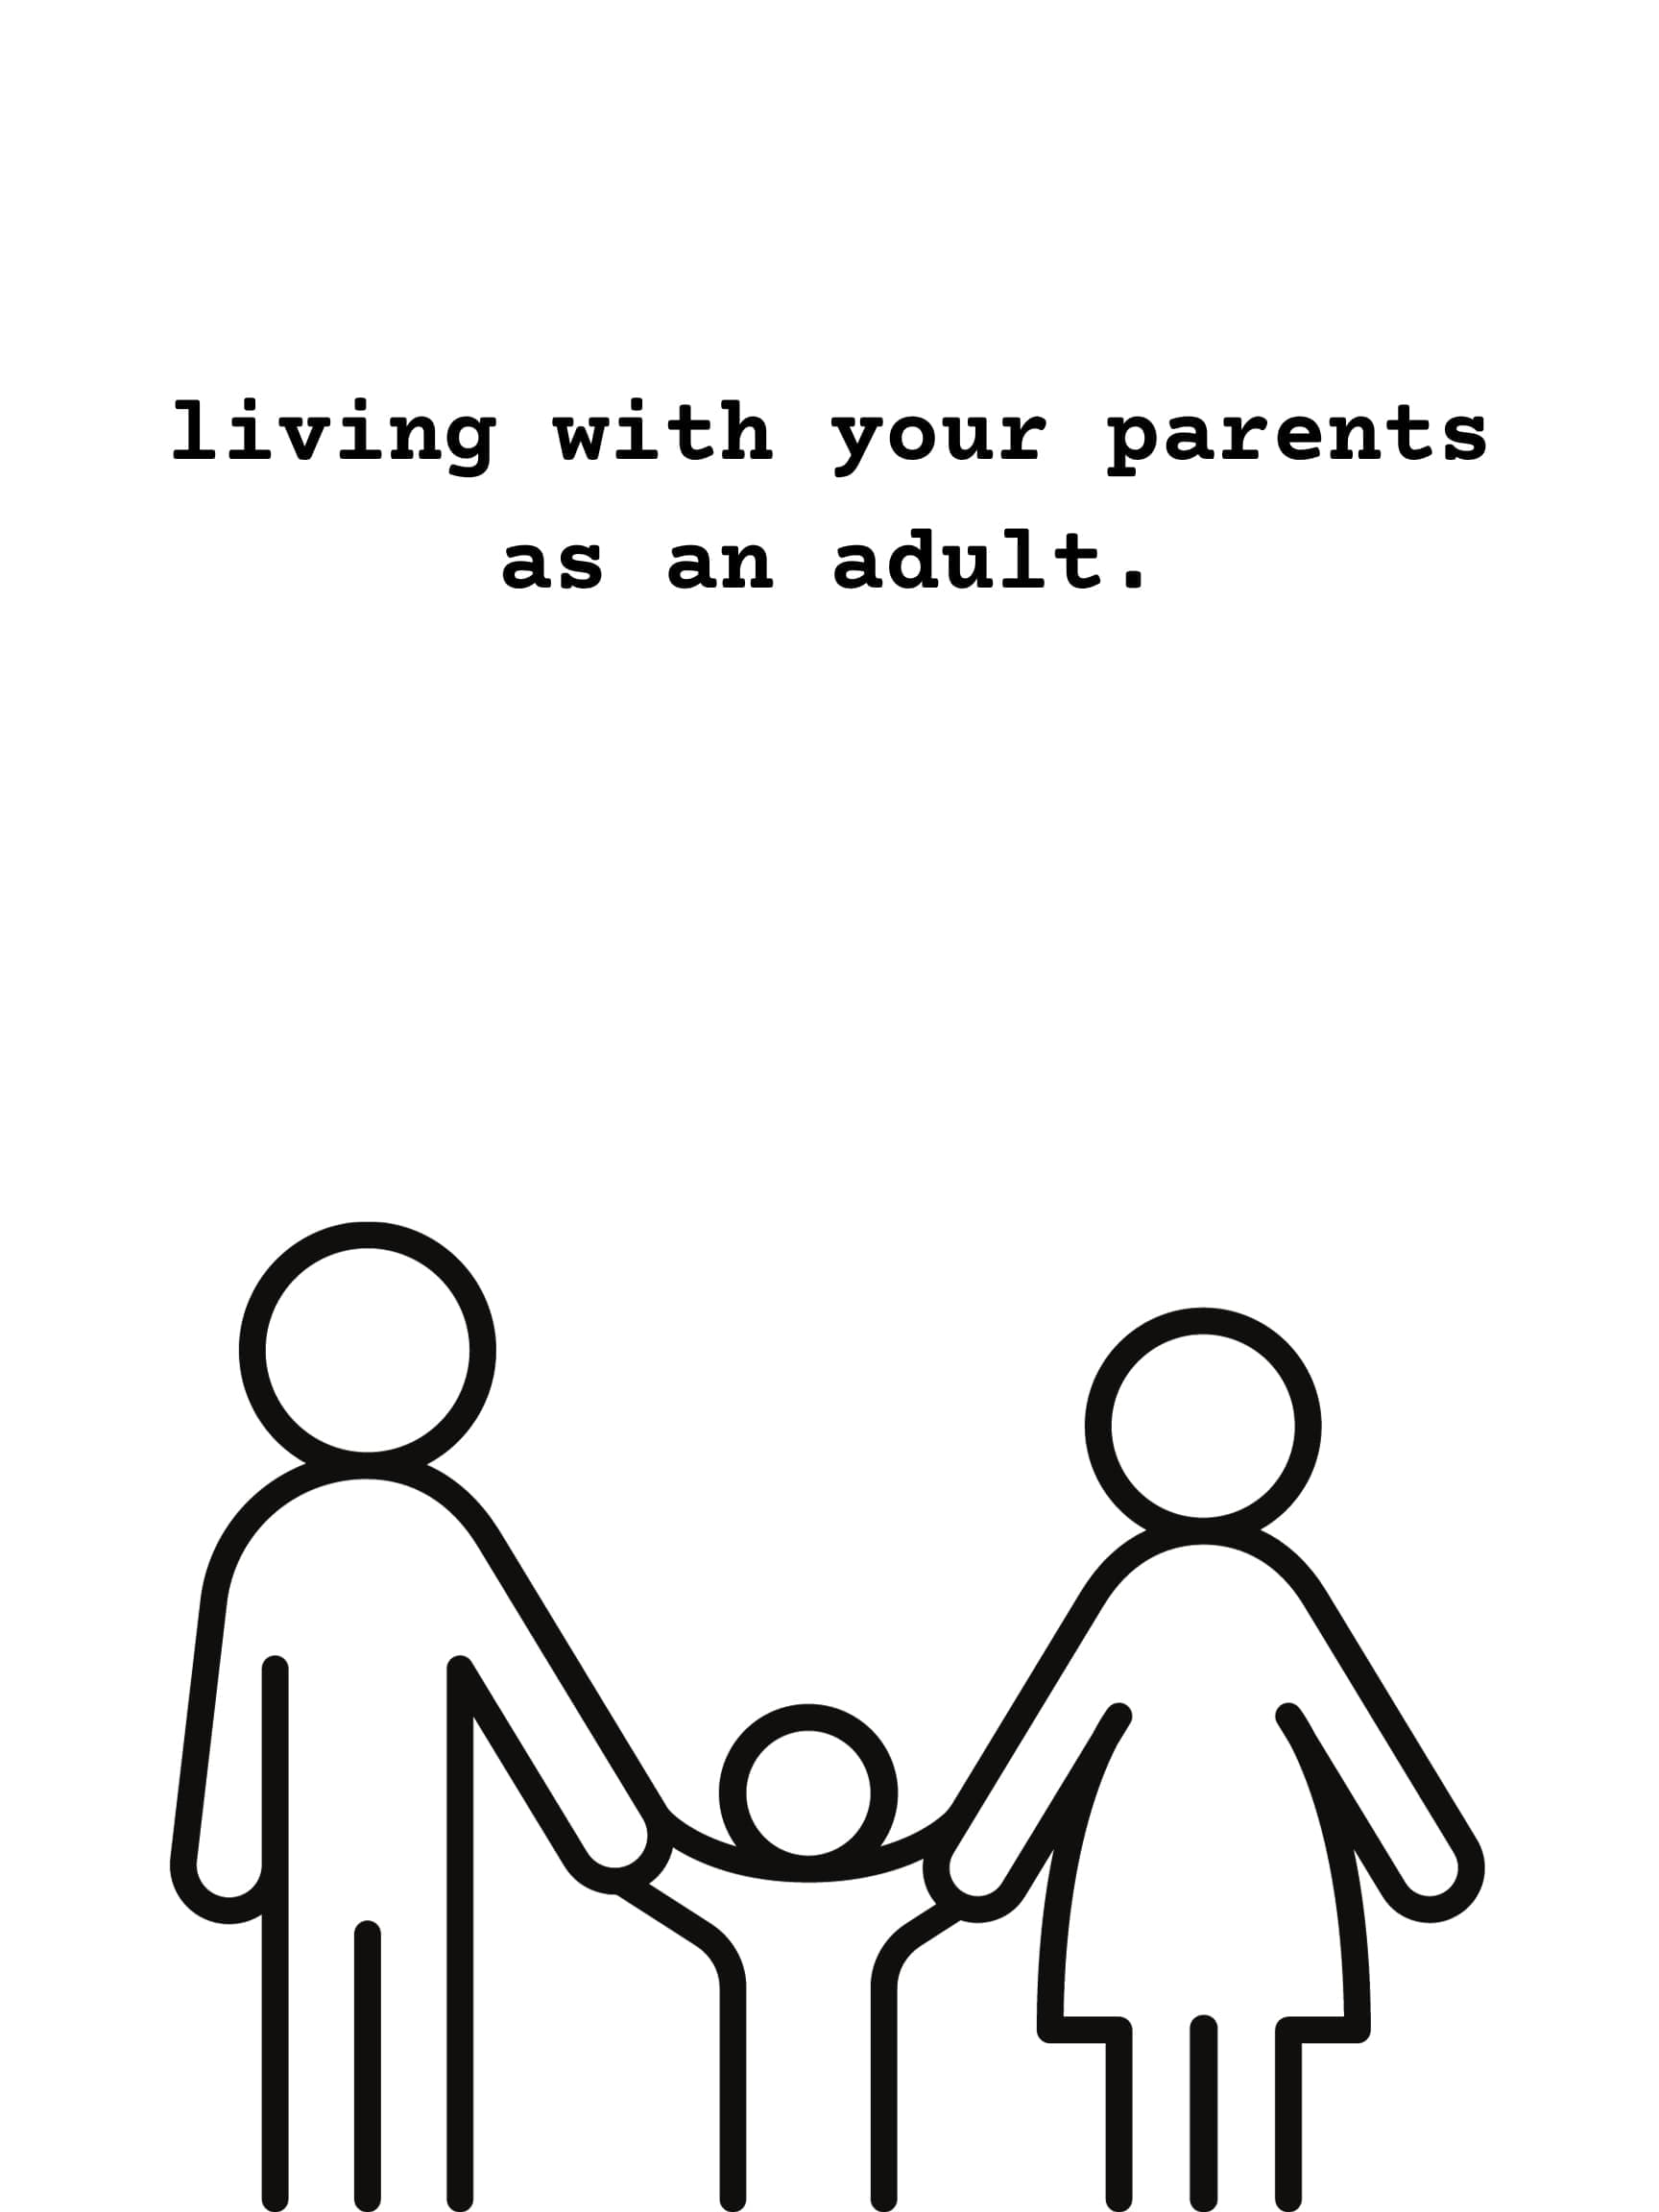 Living With Your Parents as an Adult